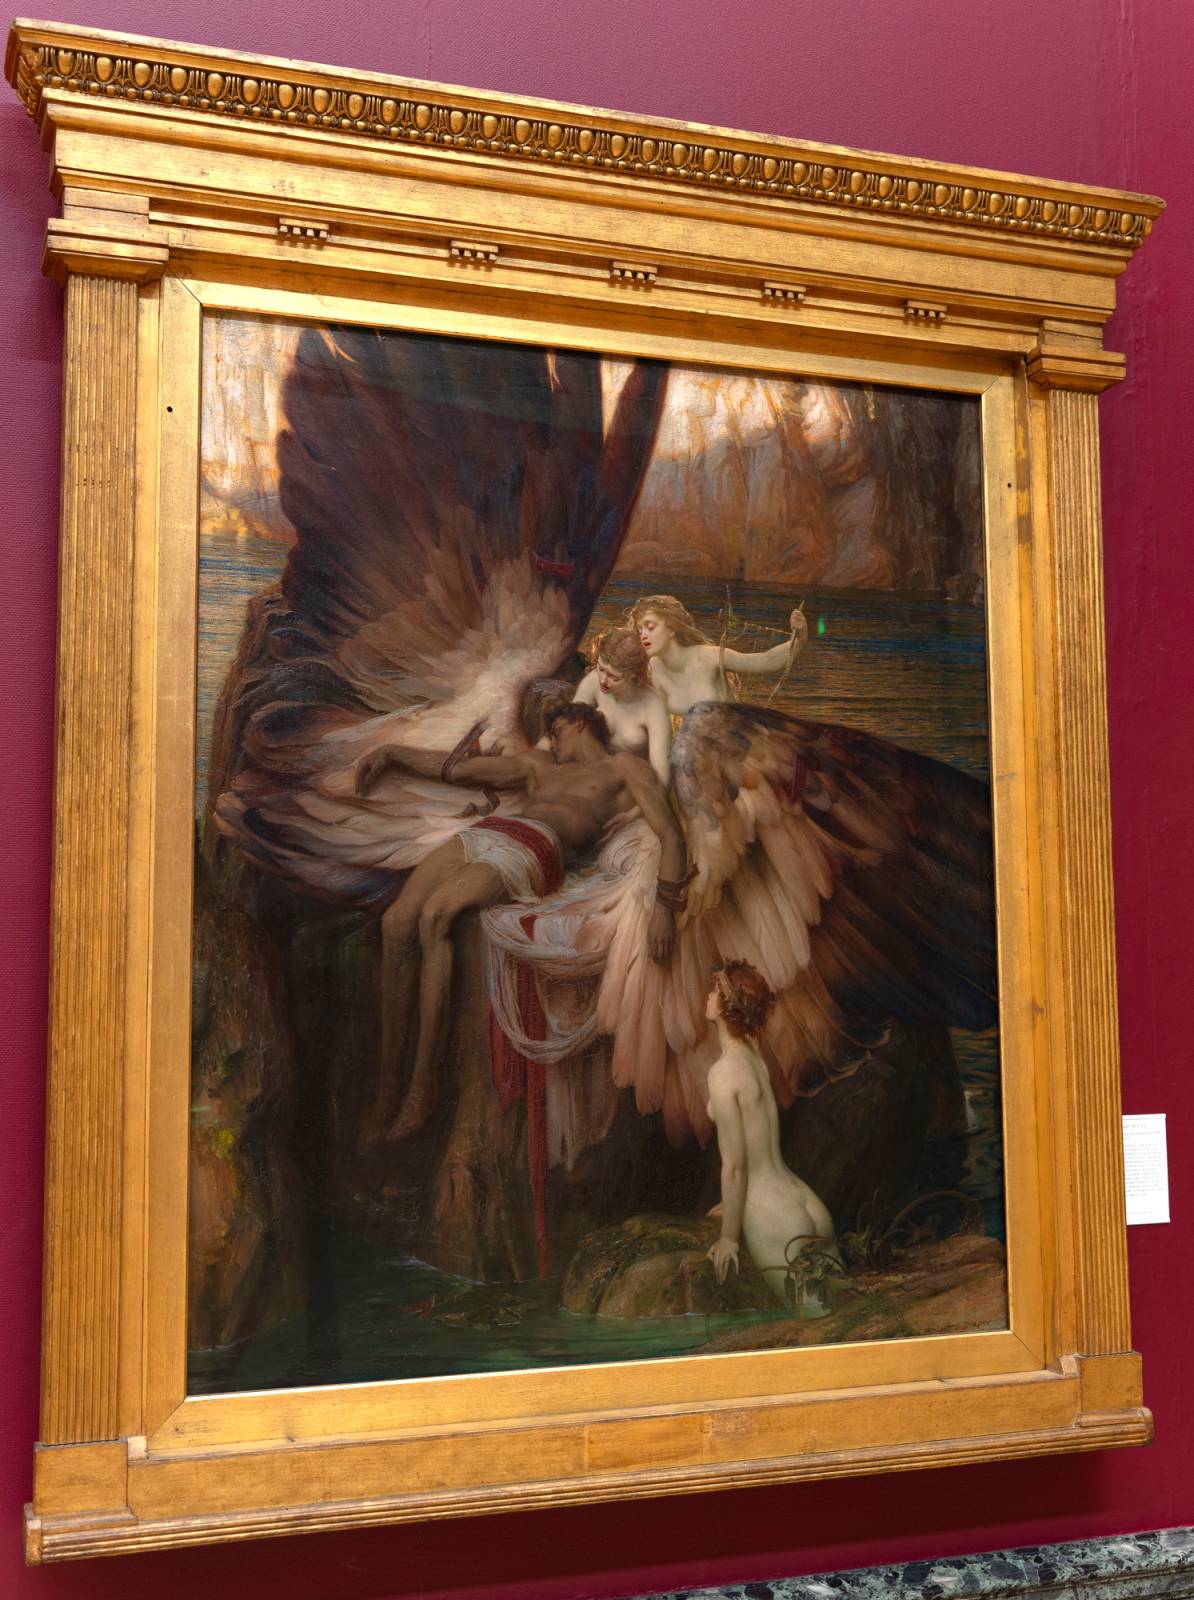 The Lament of Icarus – Study and Final Painting